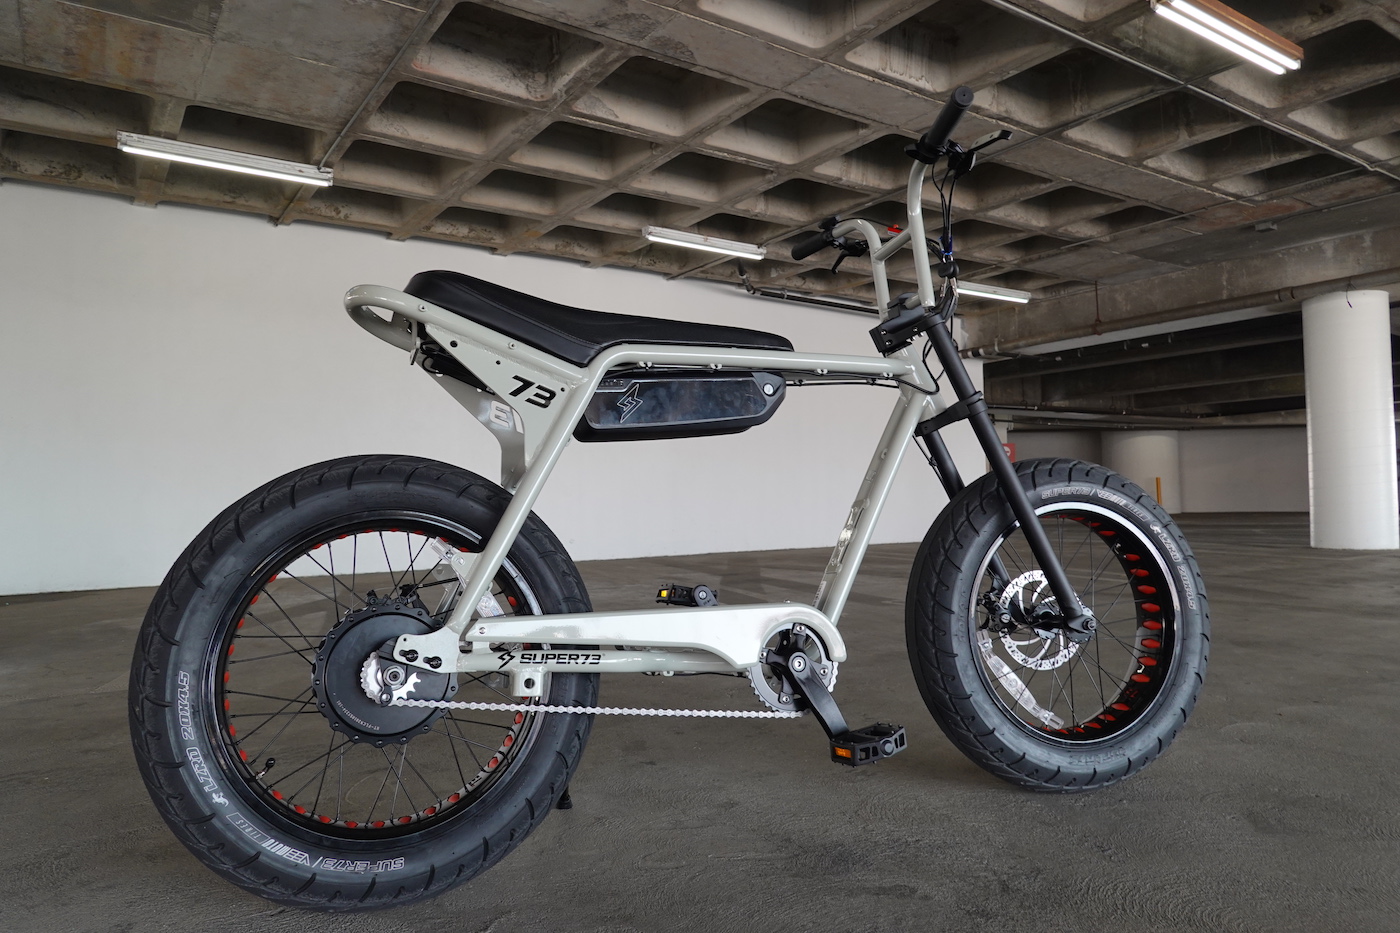 First ride: Super73-ZX is an electric moped with California vibes 